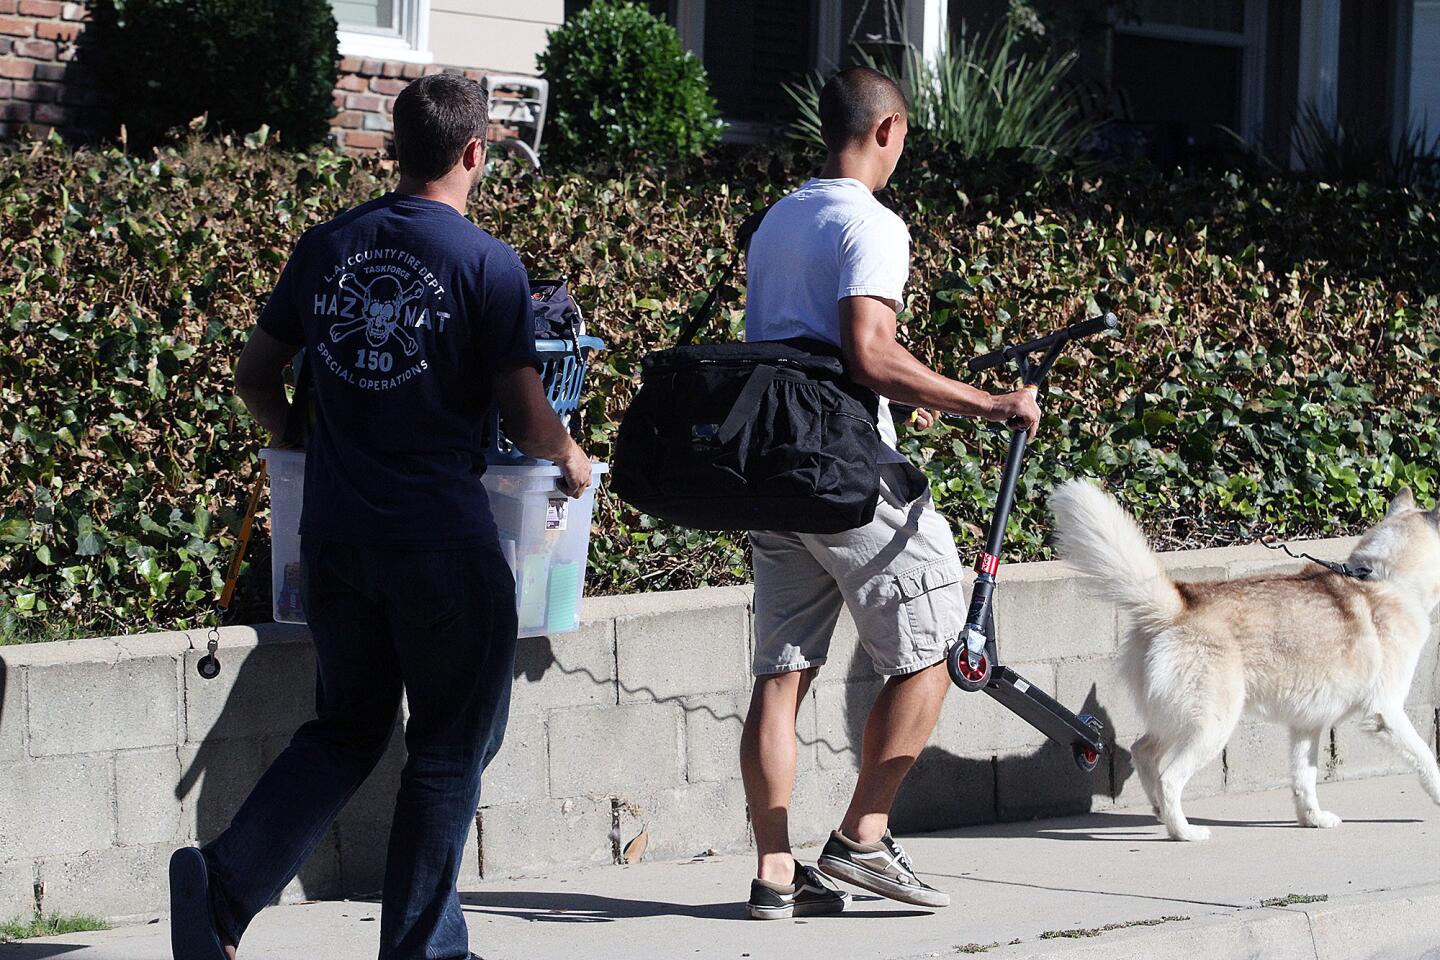 Two unknown men carry belongings and a dog from the scene of a murder-suicide on the 5000 block of Crown Avenue in La Cañada Flintridge on Monday, Sept. 7, 2015. On Sunday night, a 5-year veteran of the Los Angeles County Fire Department shot and killed his wife, a 2-year veteran of the Sheriff's Department. He then killed himself at a county Fire Department facility in Pacoima, according to officials.